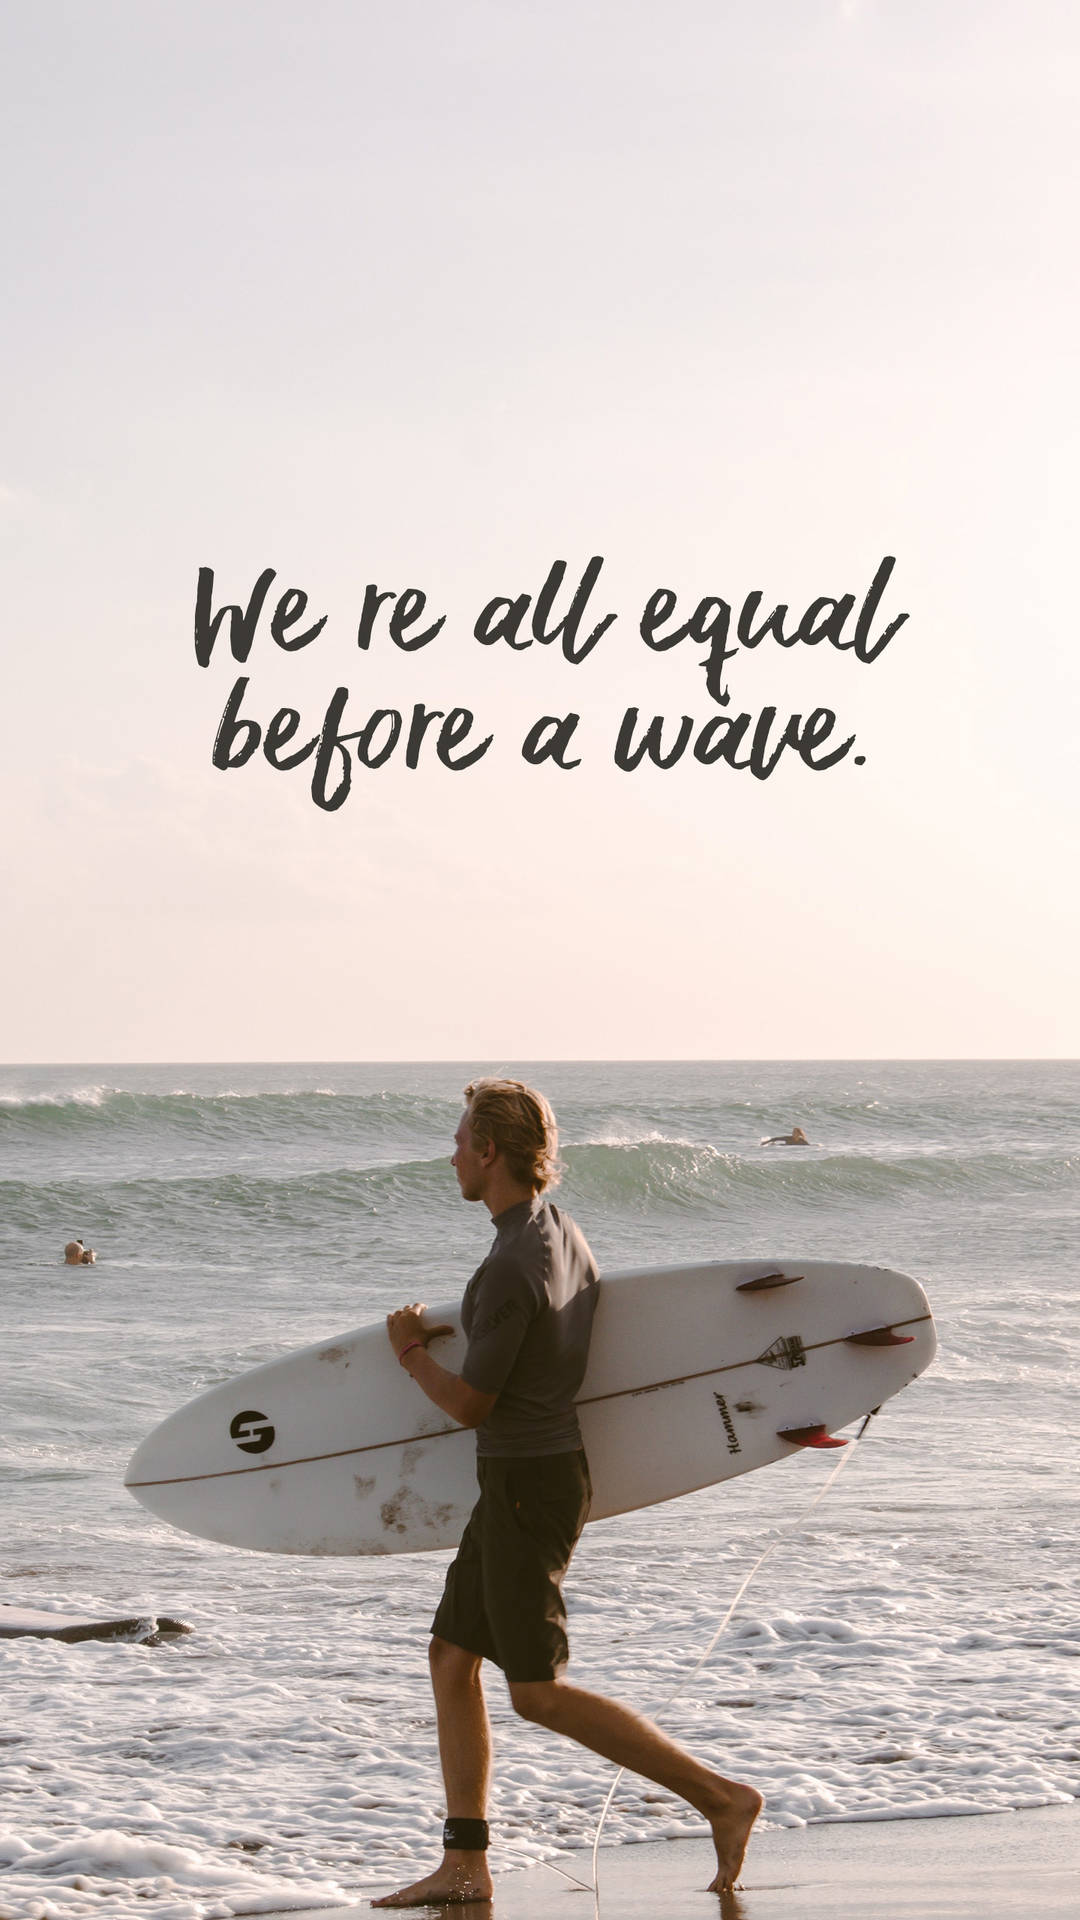 Surfing All Equal Quote Background